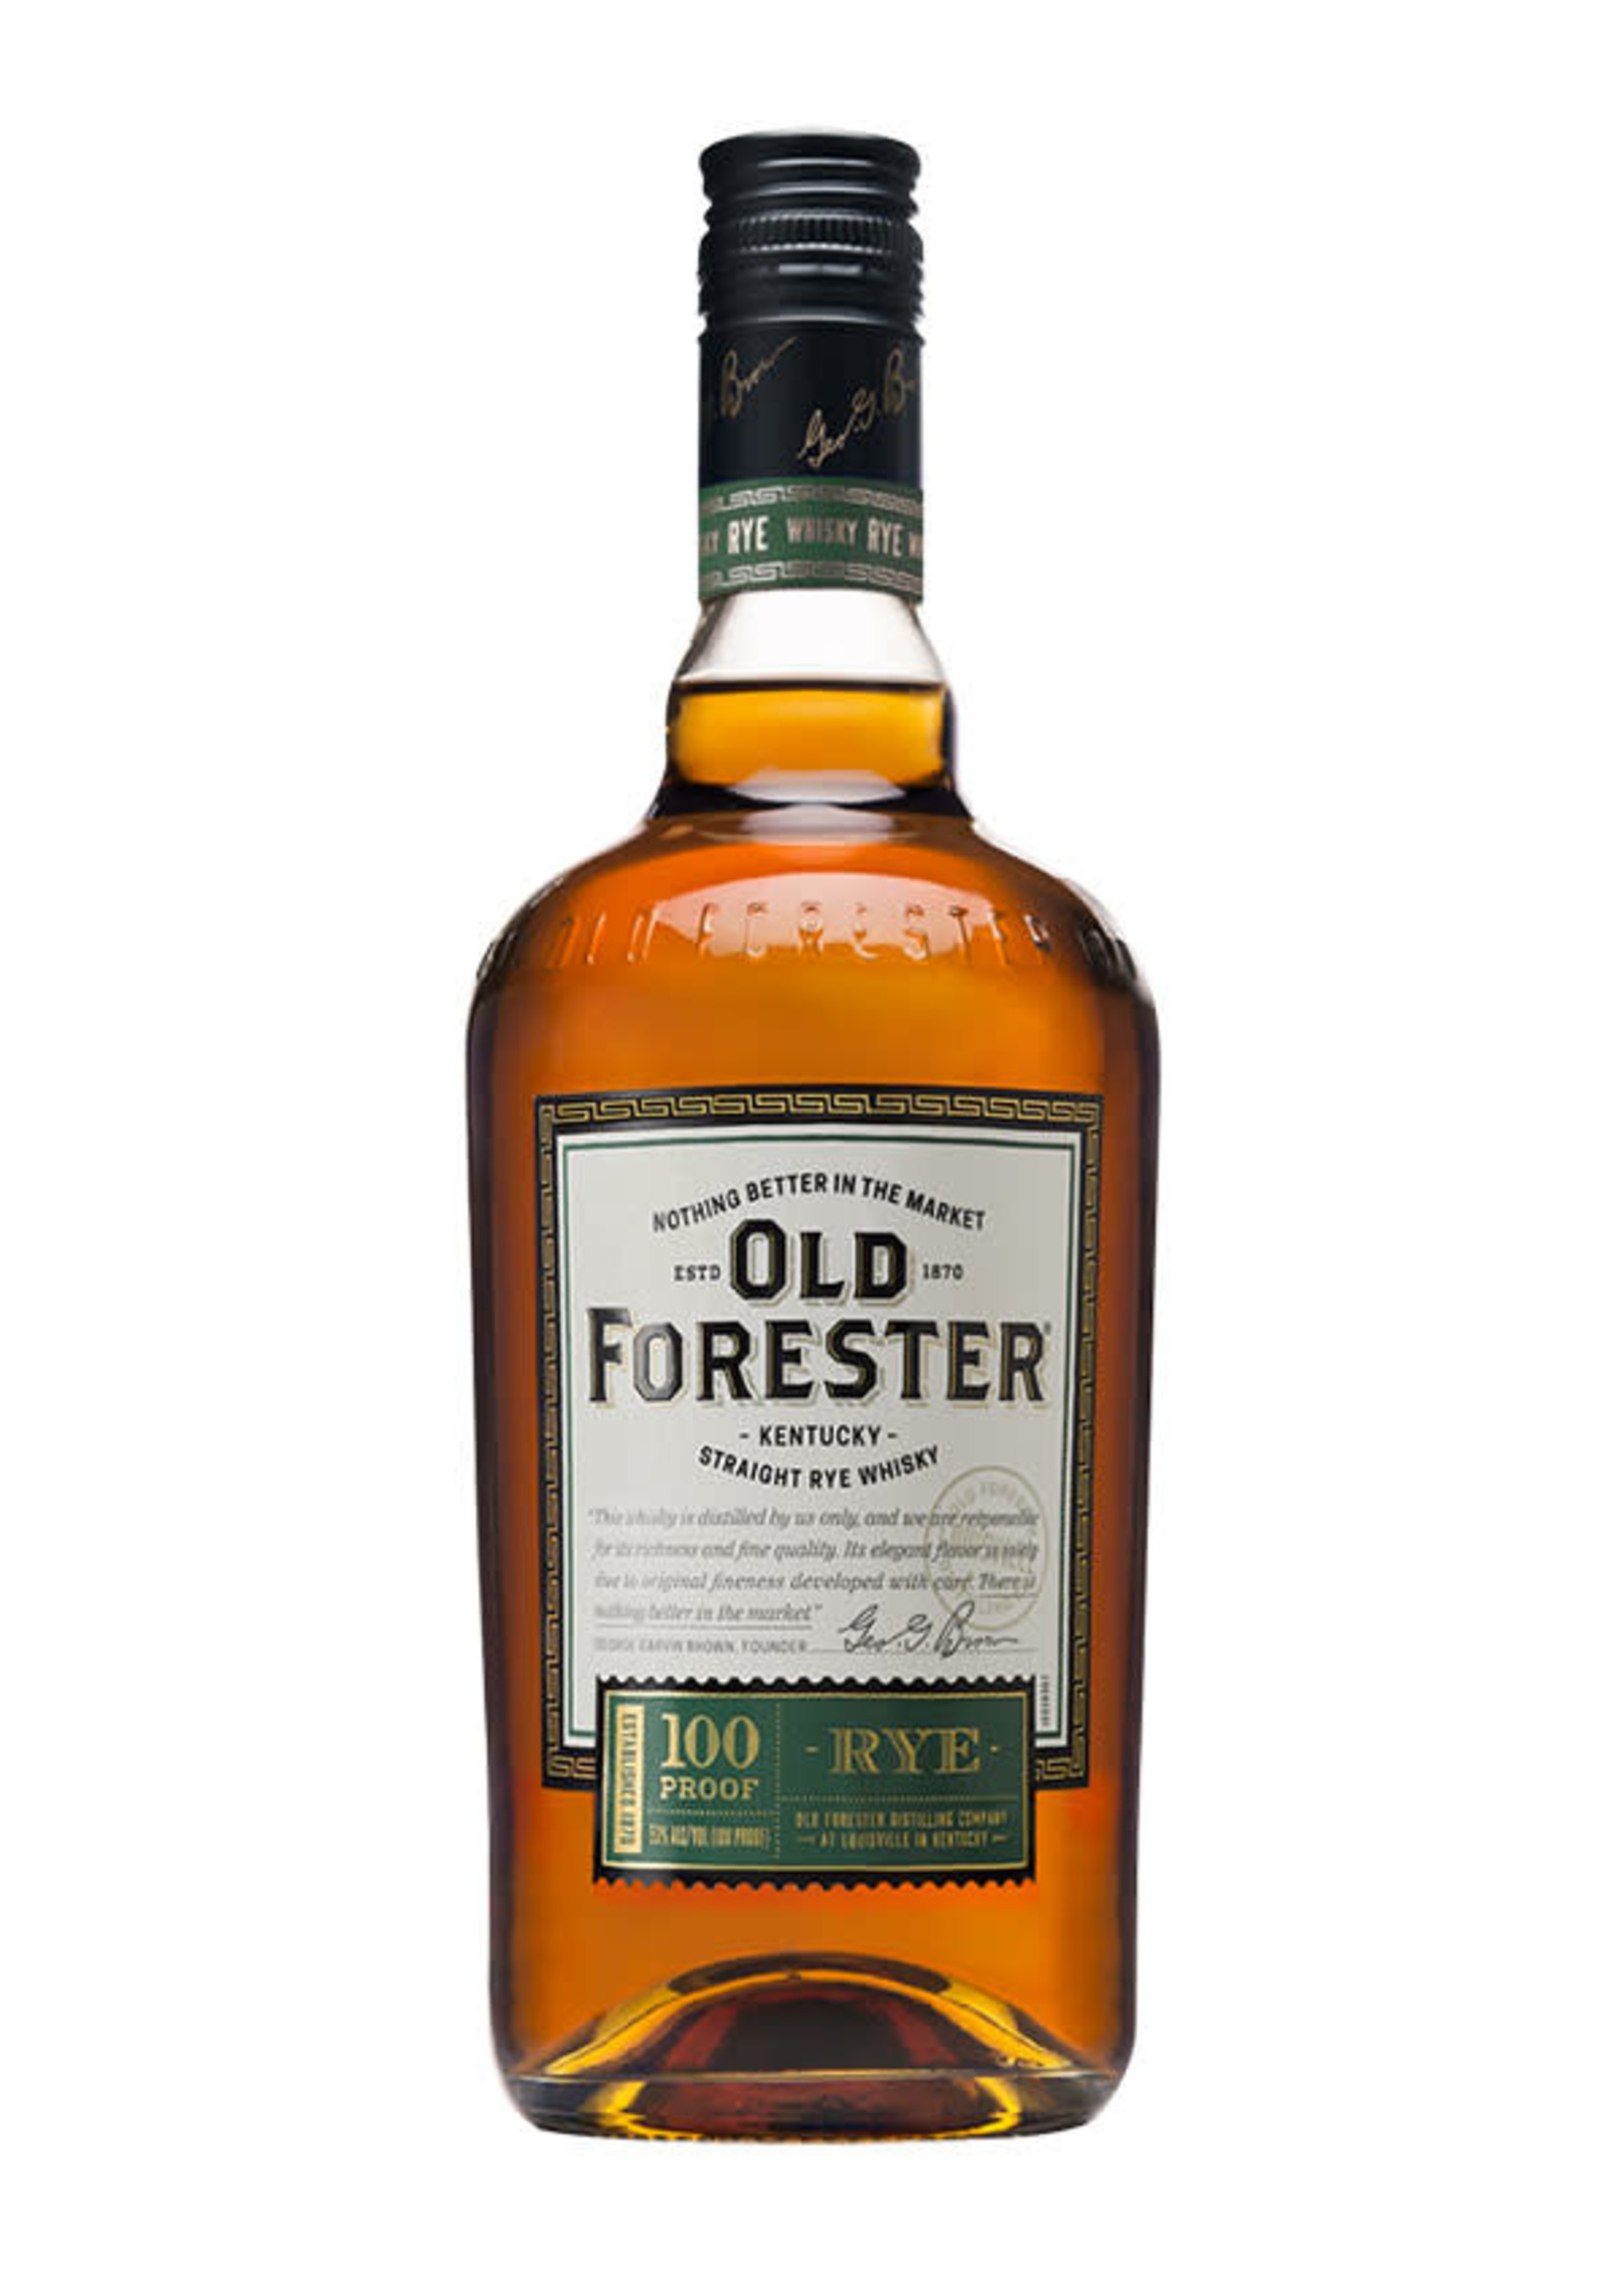 Old Forester Old Forester 100 Proof Rye